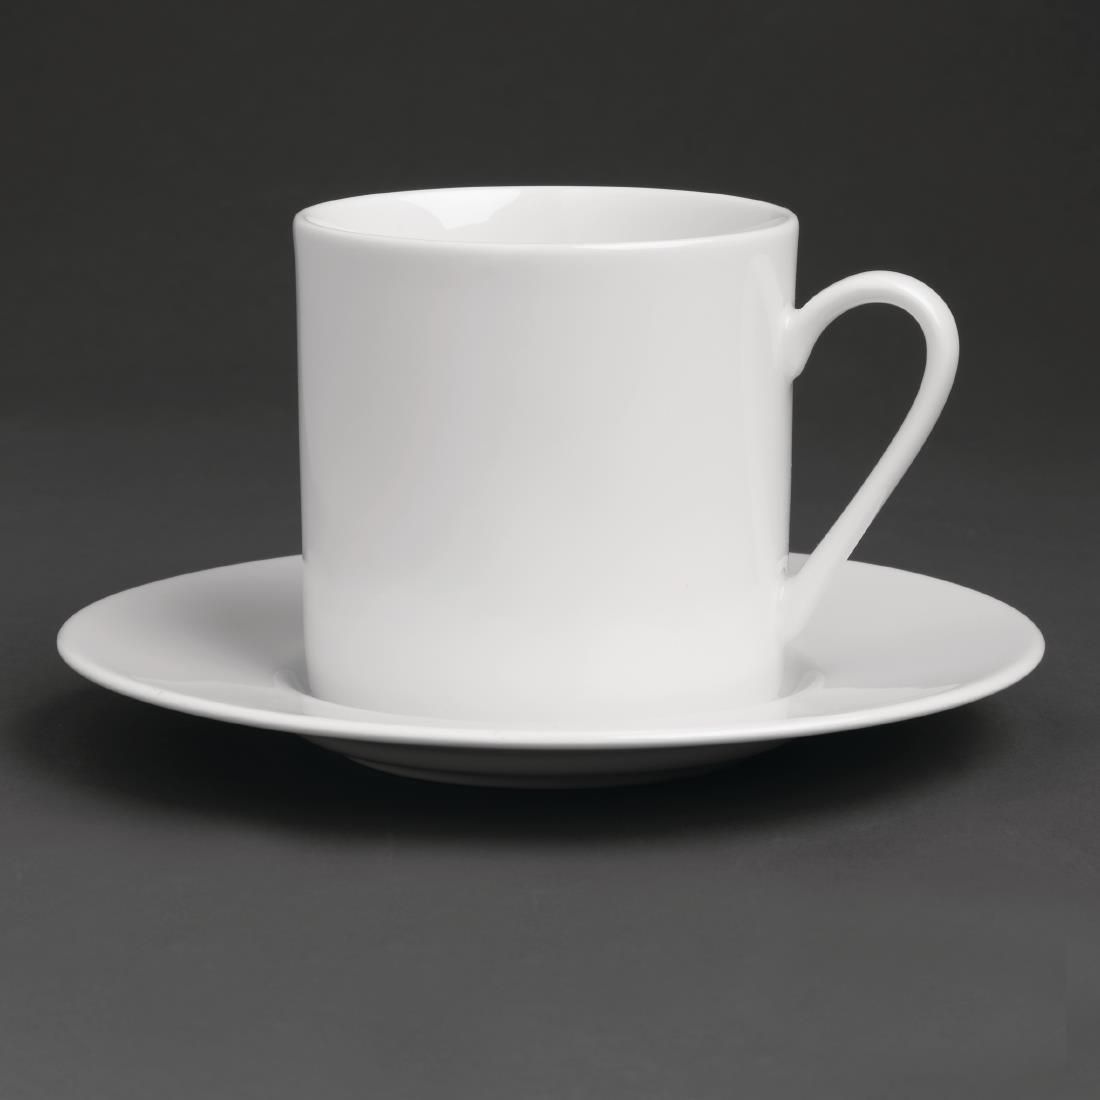 Royal Porcelain Maxadura Coffee Cup Saucer 150mm (Pack of 12) - GT906  - 6